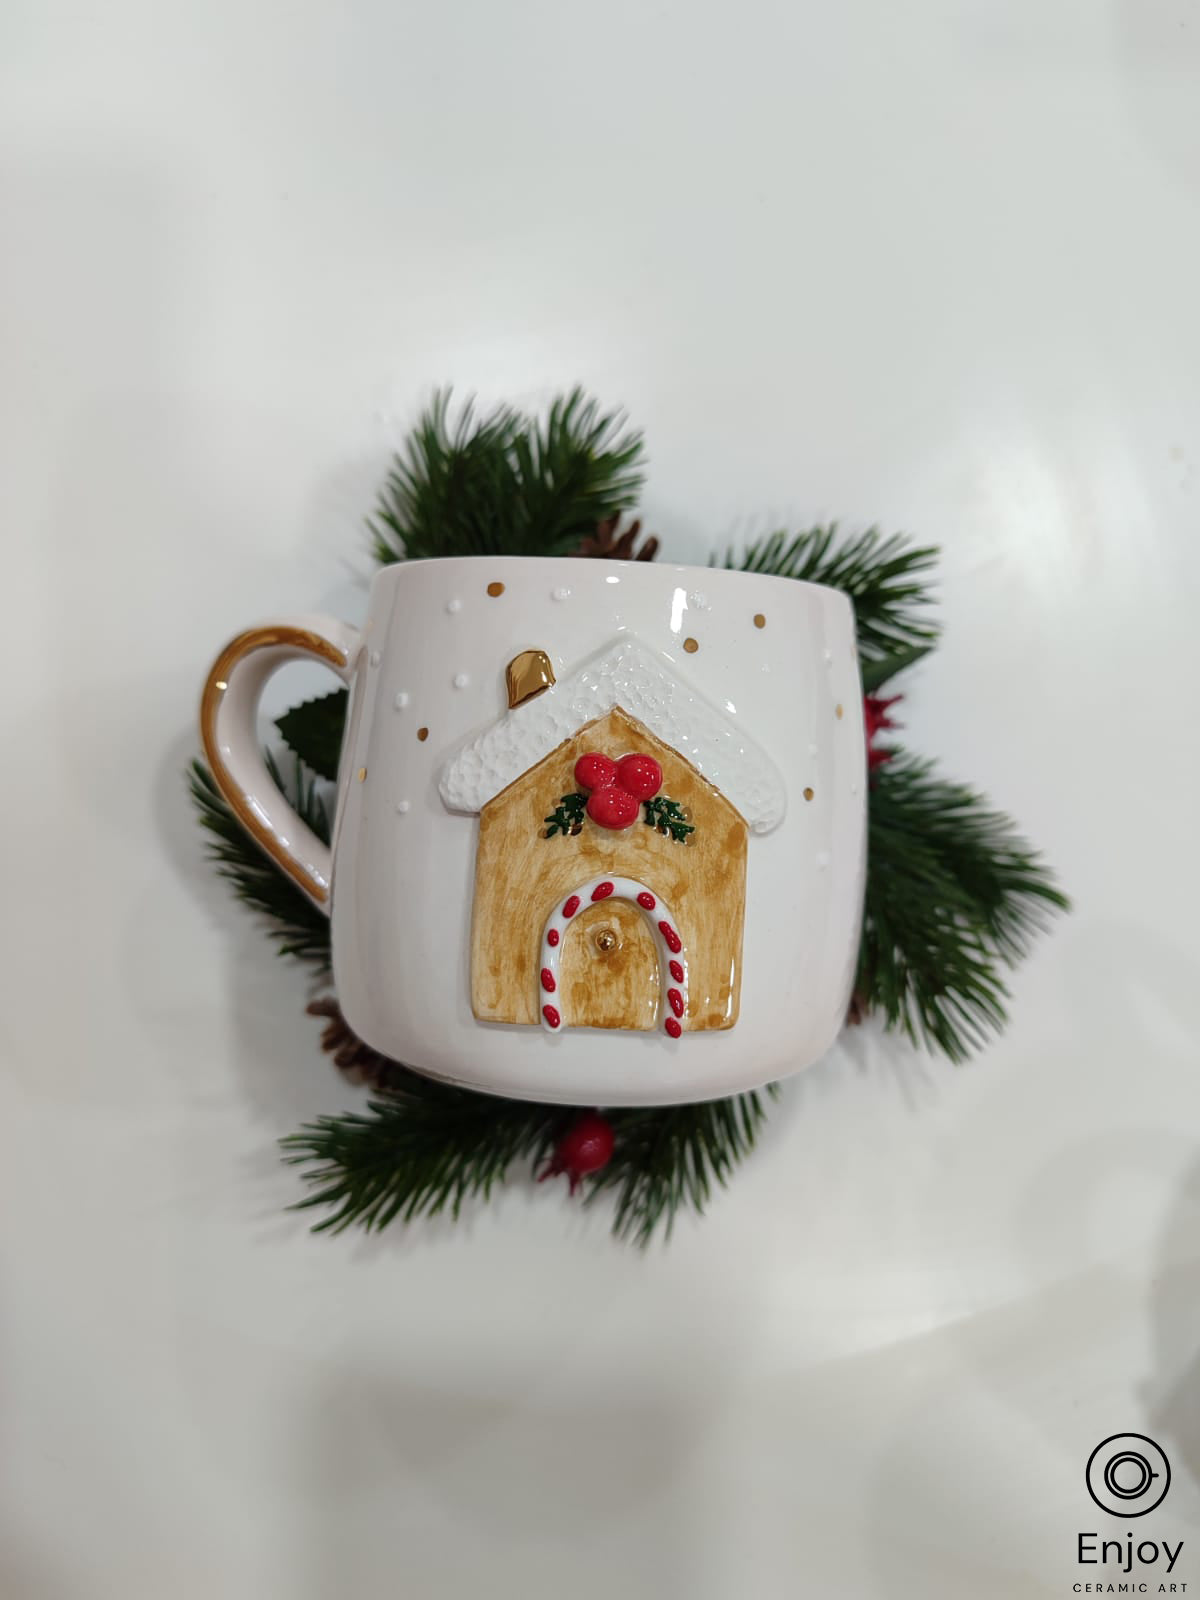 A chic white mug adorned with 3D gingerbread house design, resting on a green pine branch